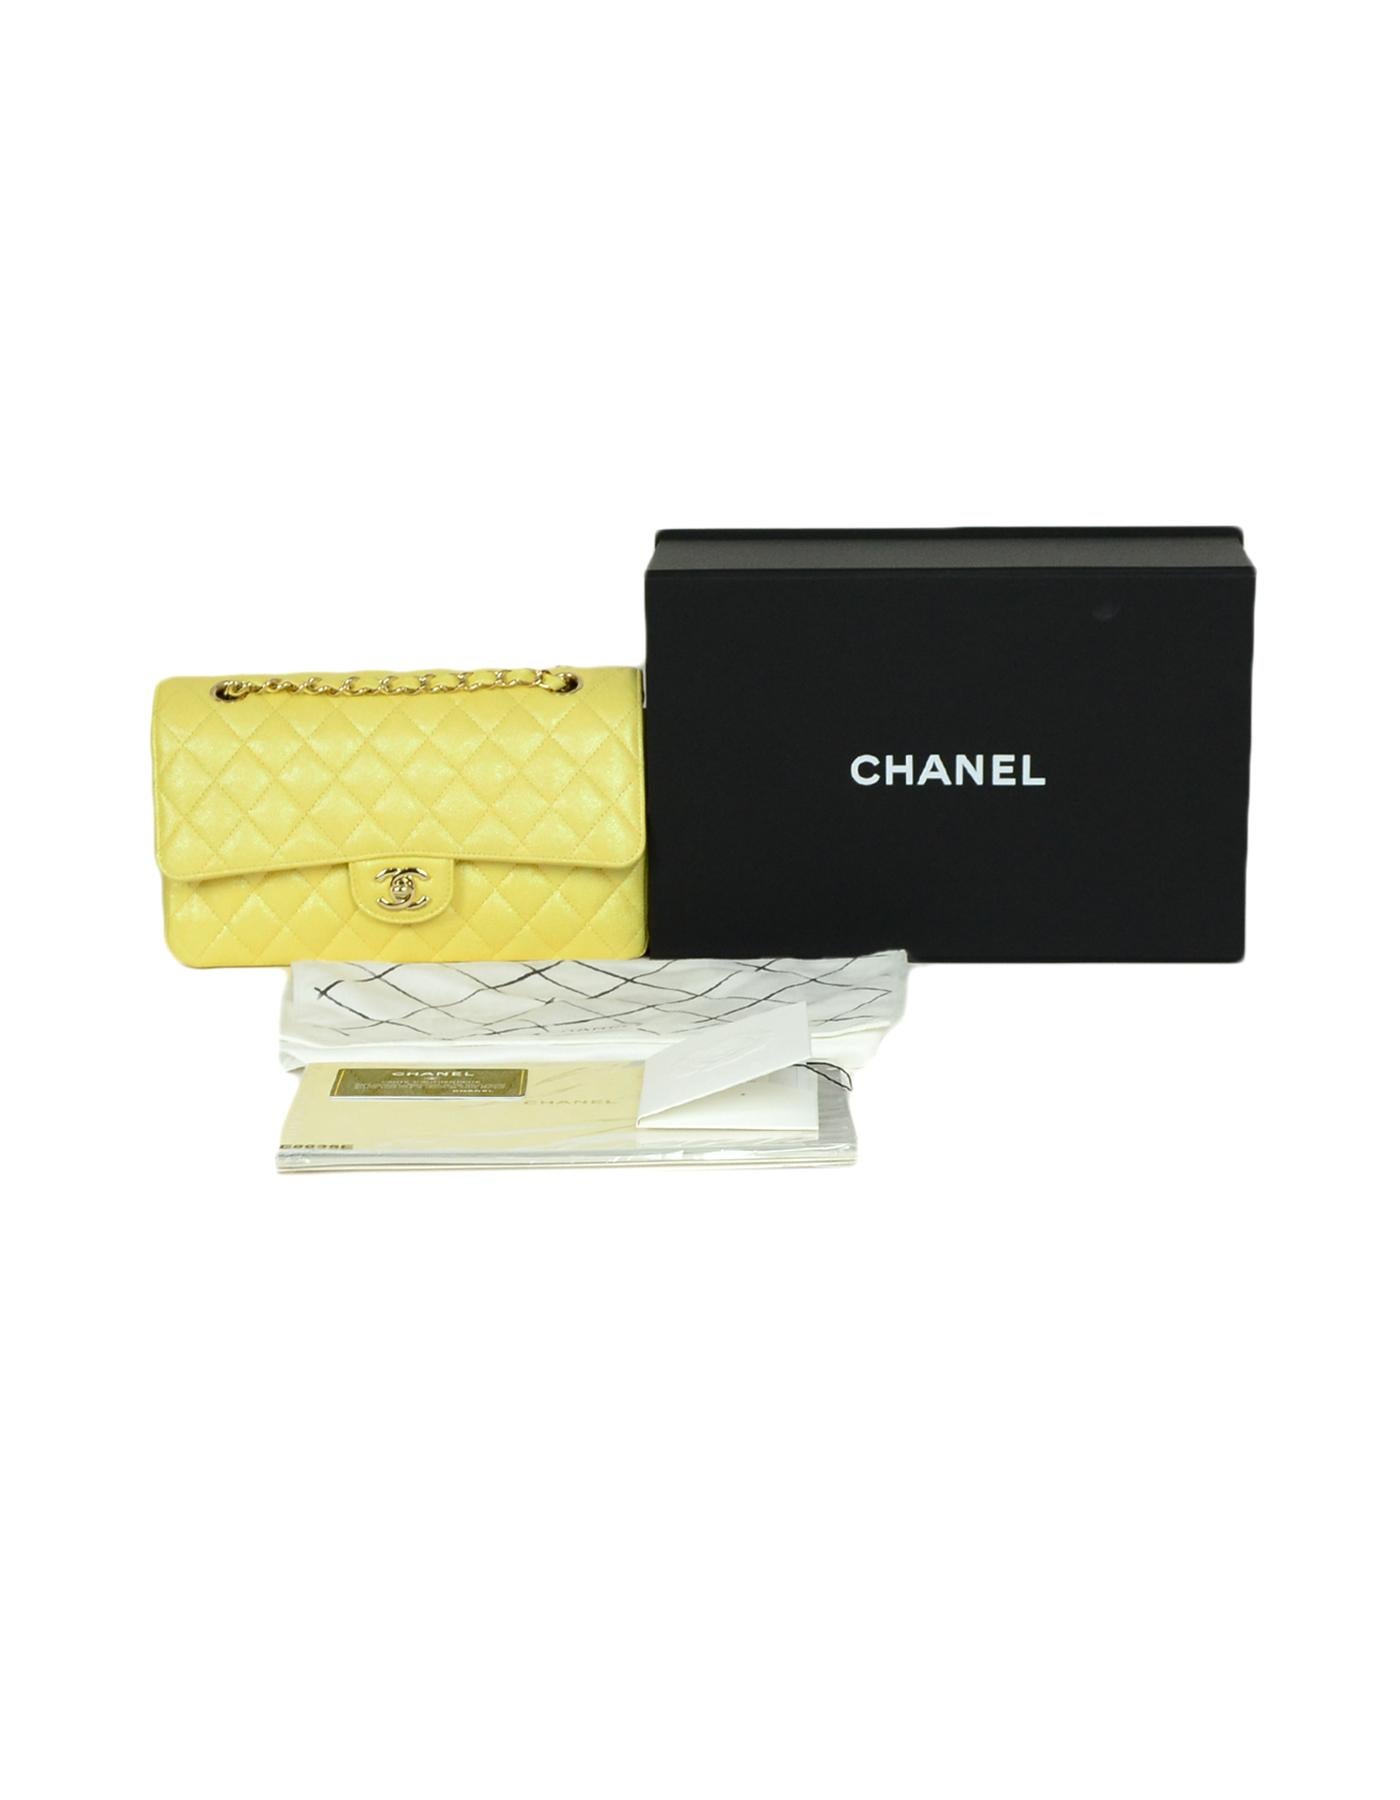 Chanel Iridescent Yellow Quilted Caviar Leather Medium Double Flap Classic Bag 3